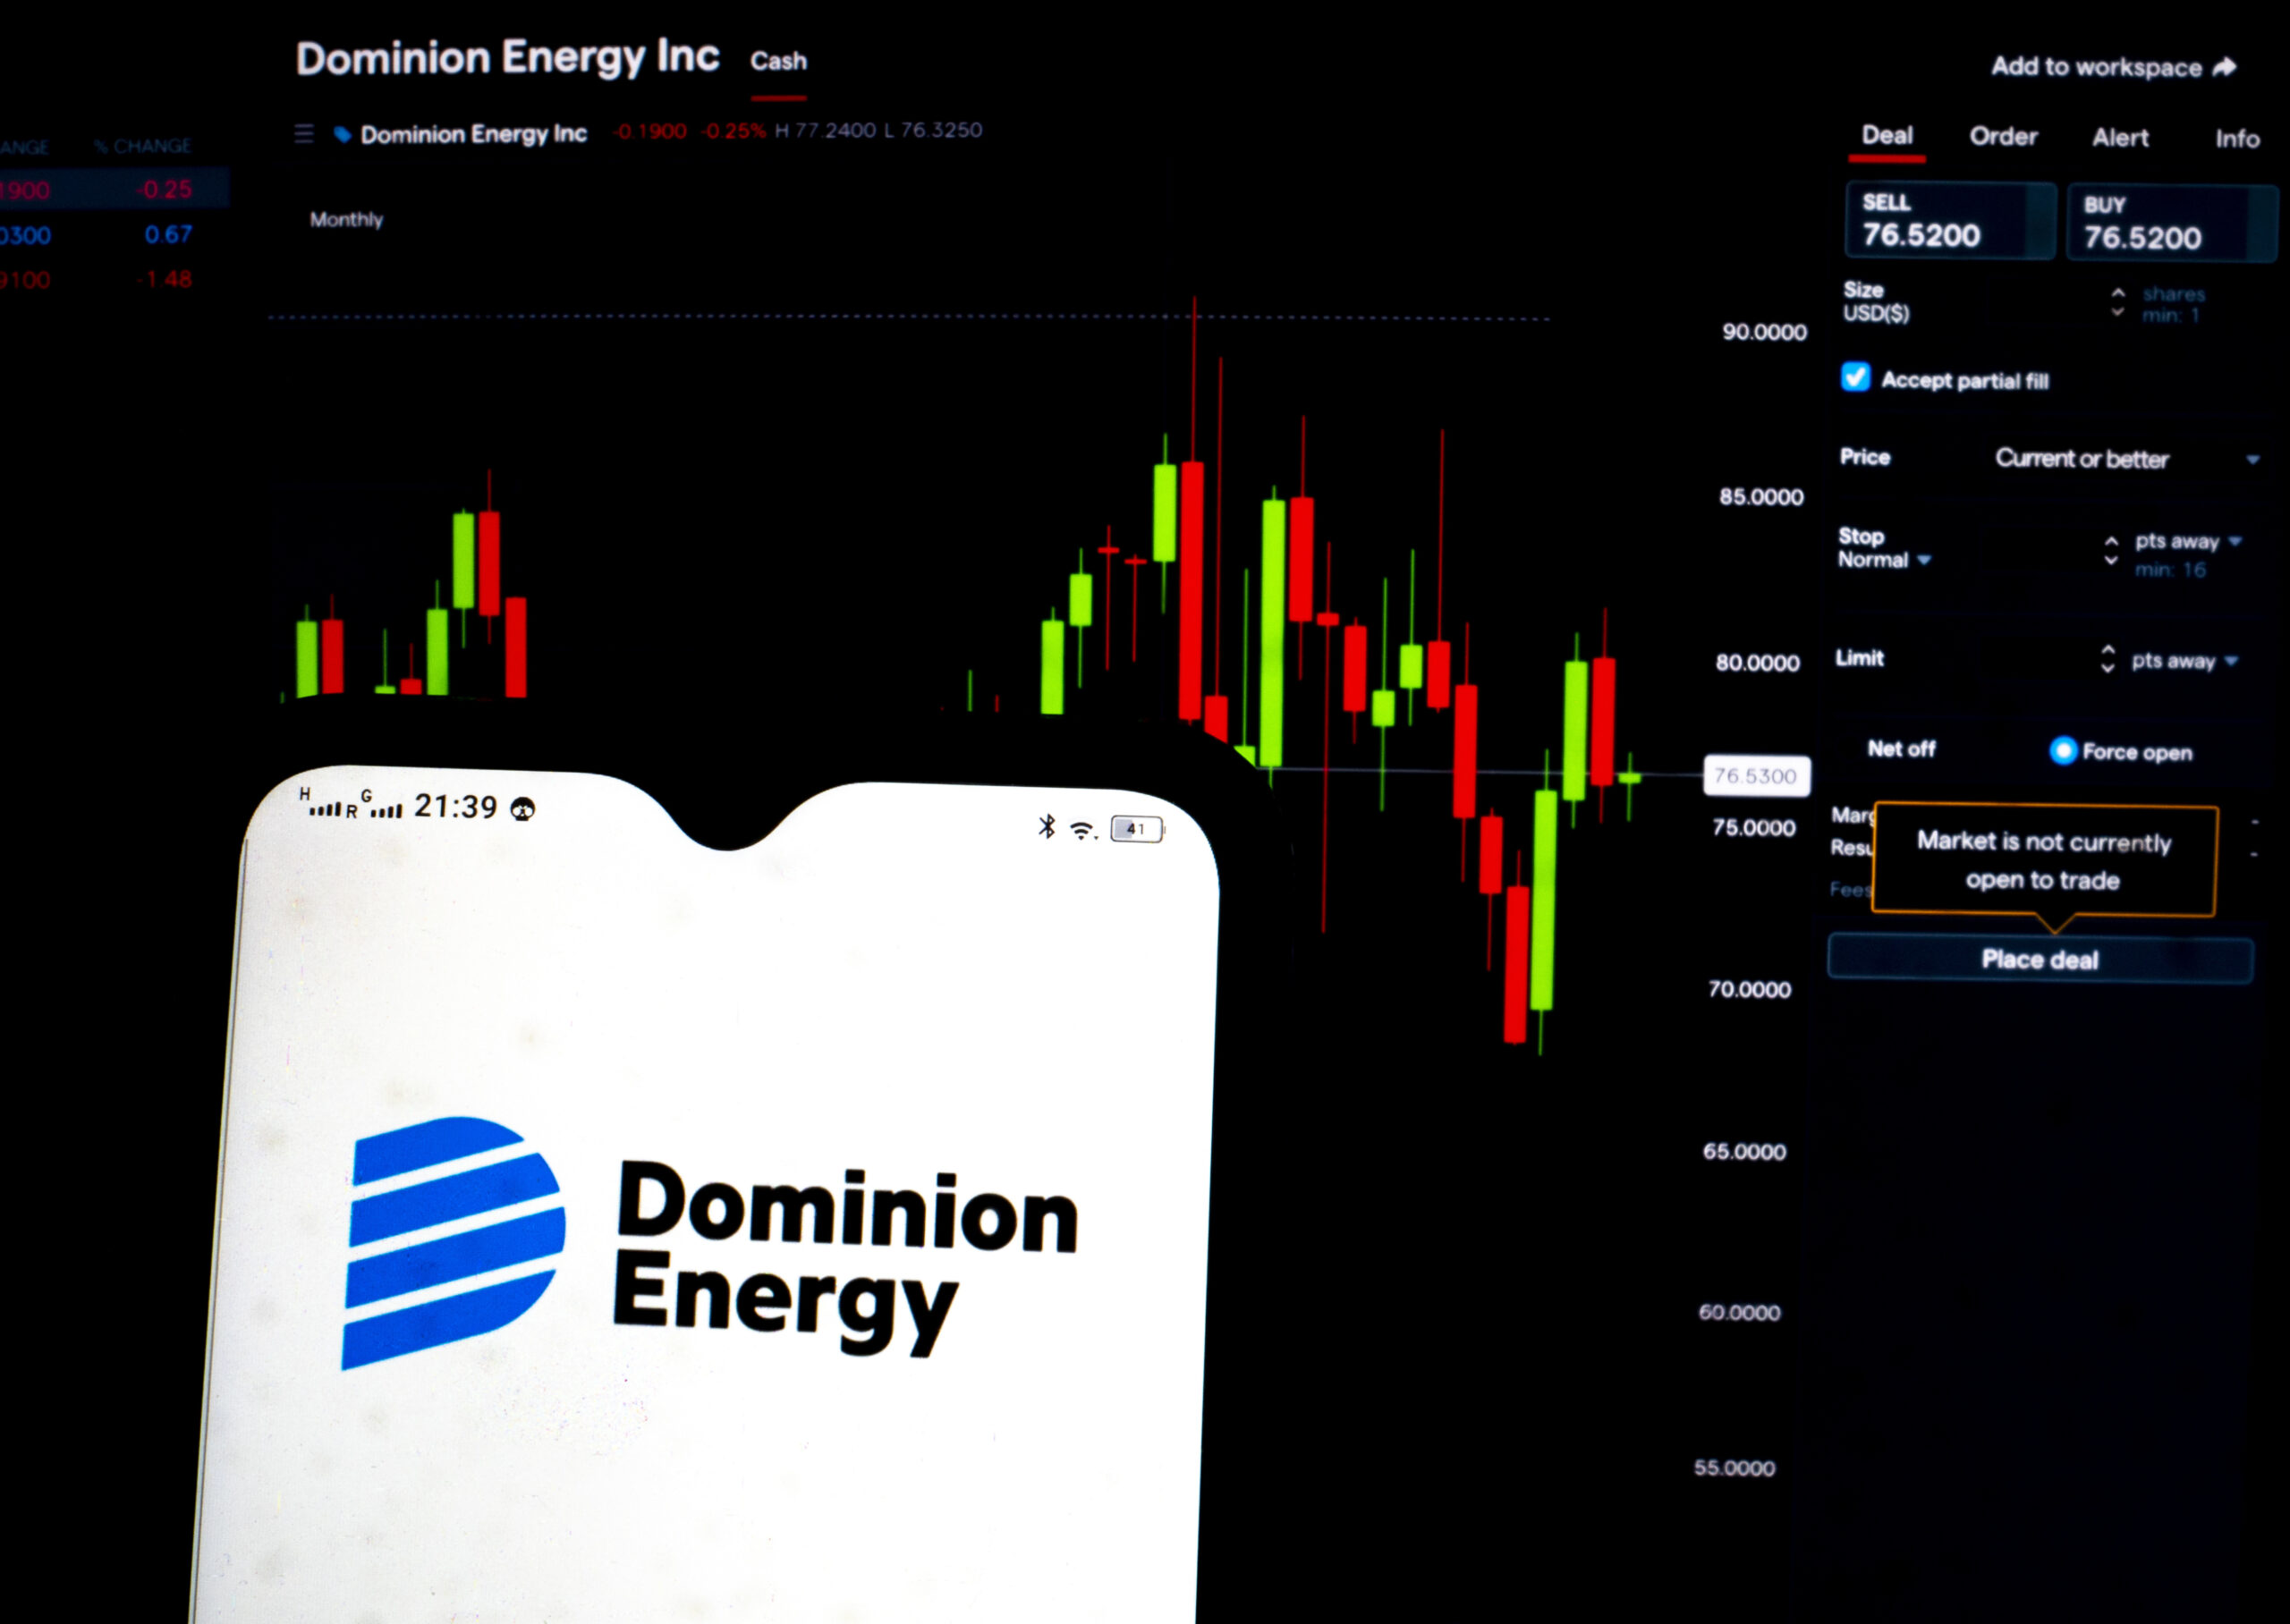 Dominion Energy has proposed building a new natural gas power plant in Chesterfield, Virginia. Credit: Photo Illustration by Igor Golovniov/SOPA Images/LightRocket via Getty Images